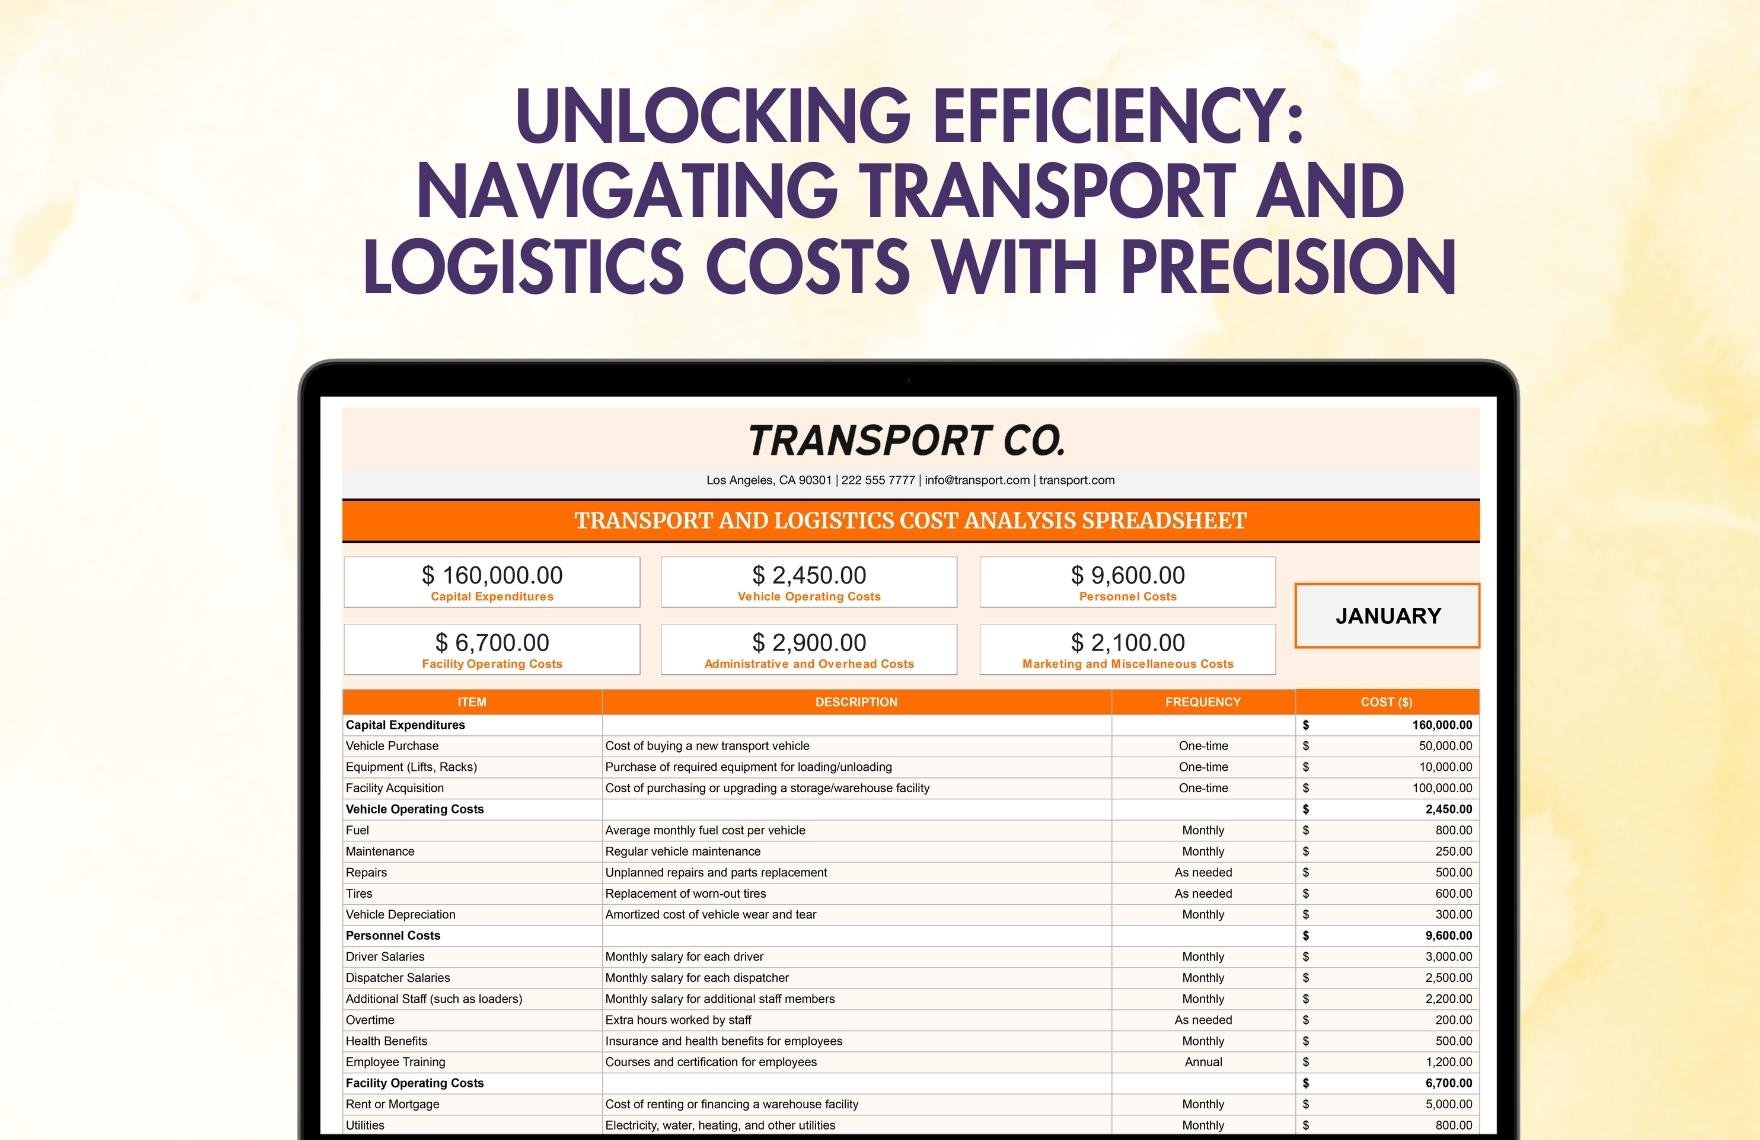 Transport and Logistics Cost Analysis Spreadsheet Template